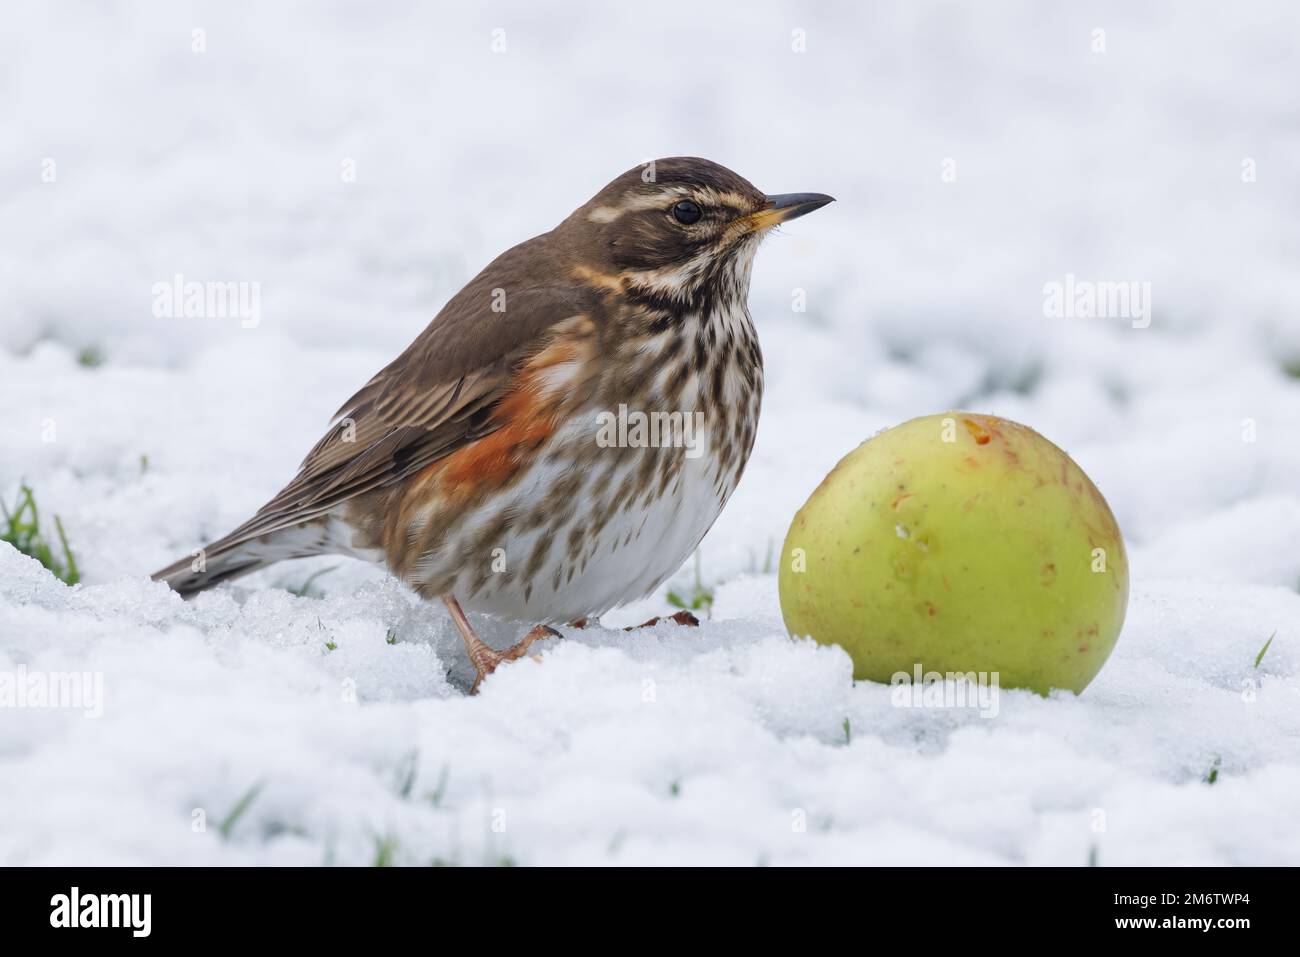 Redwing on snow with a windfall apple Stock Photo